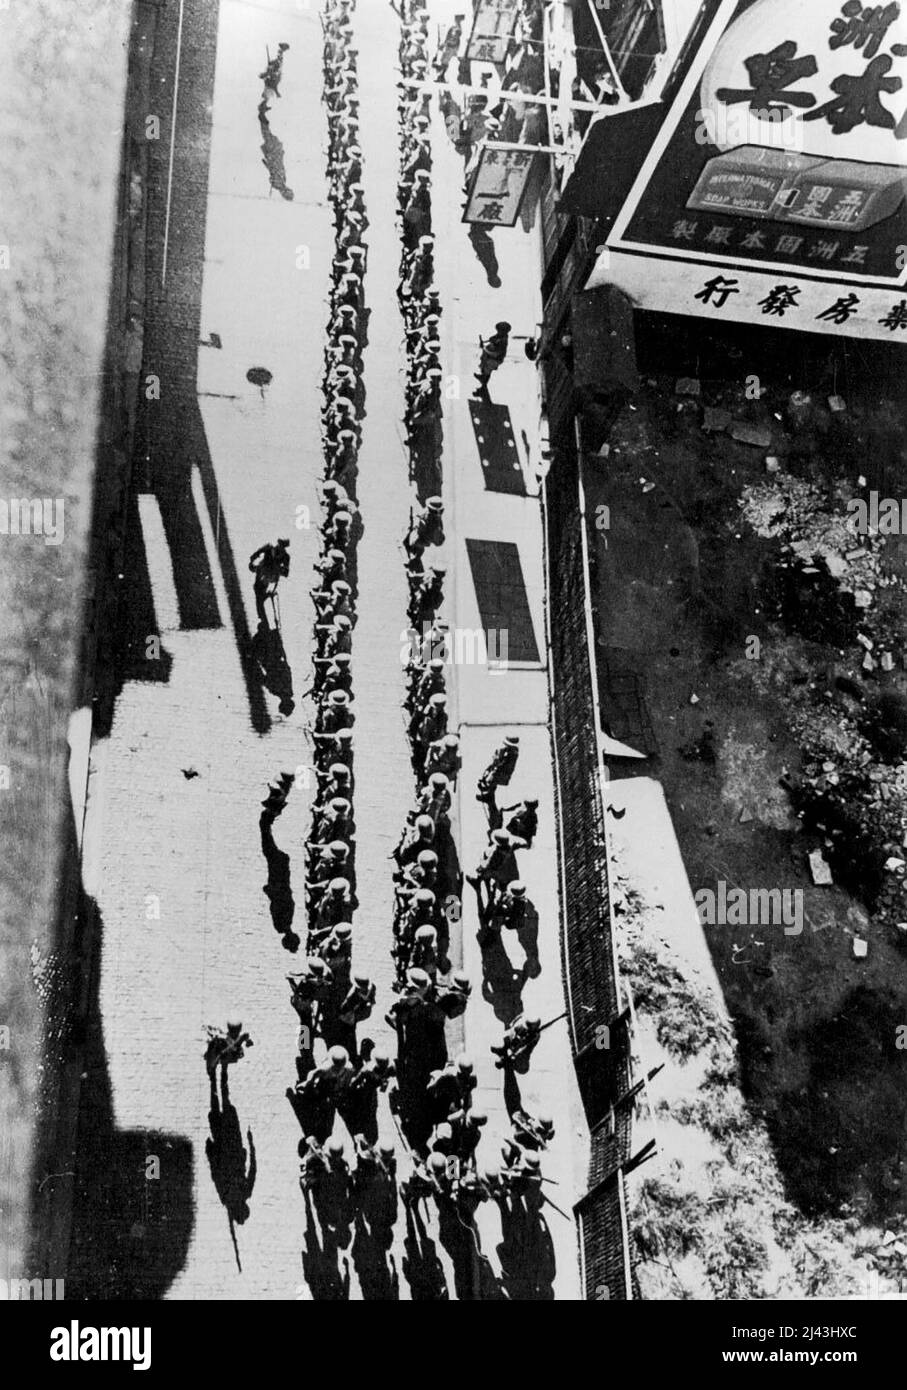 British Troops In International Settlement -- British troops in the International settlement in Shanghai, seen from above, while they are lined up and ready to go into the defence linese faching the Chinese and the Japanese. It was men like these who lost their lives recently while on duty at their posts in the settlement. November 15, 1937. (Photo by Associated Press Photo). Stock Photo